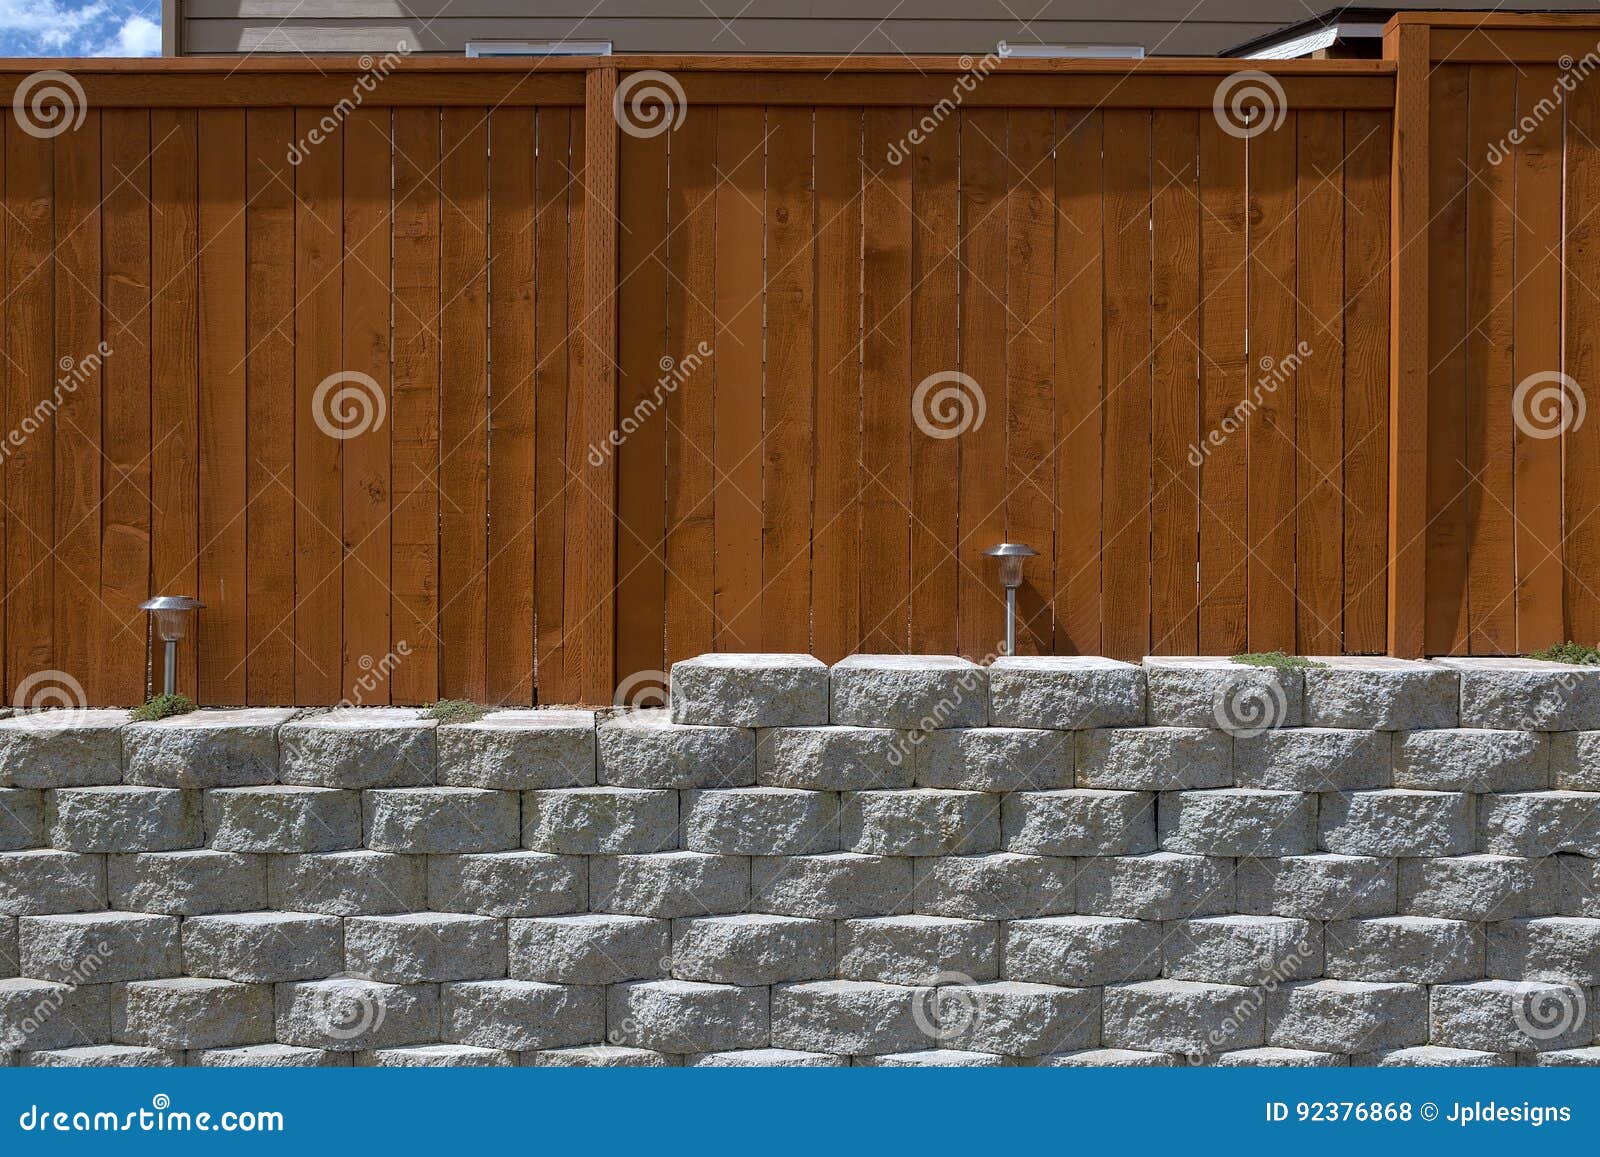 wood fencing on cement stack stone retaining wall